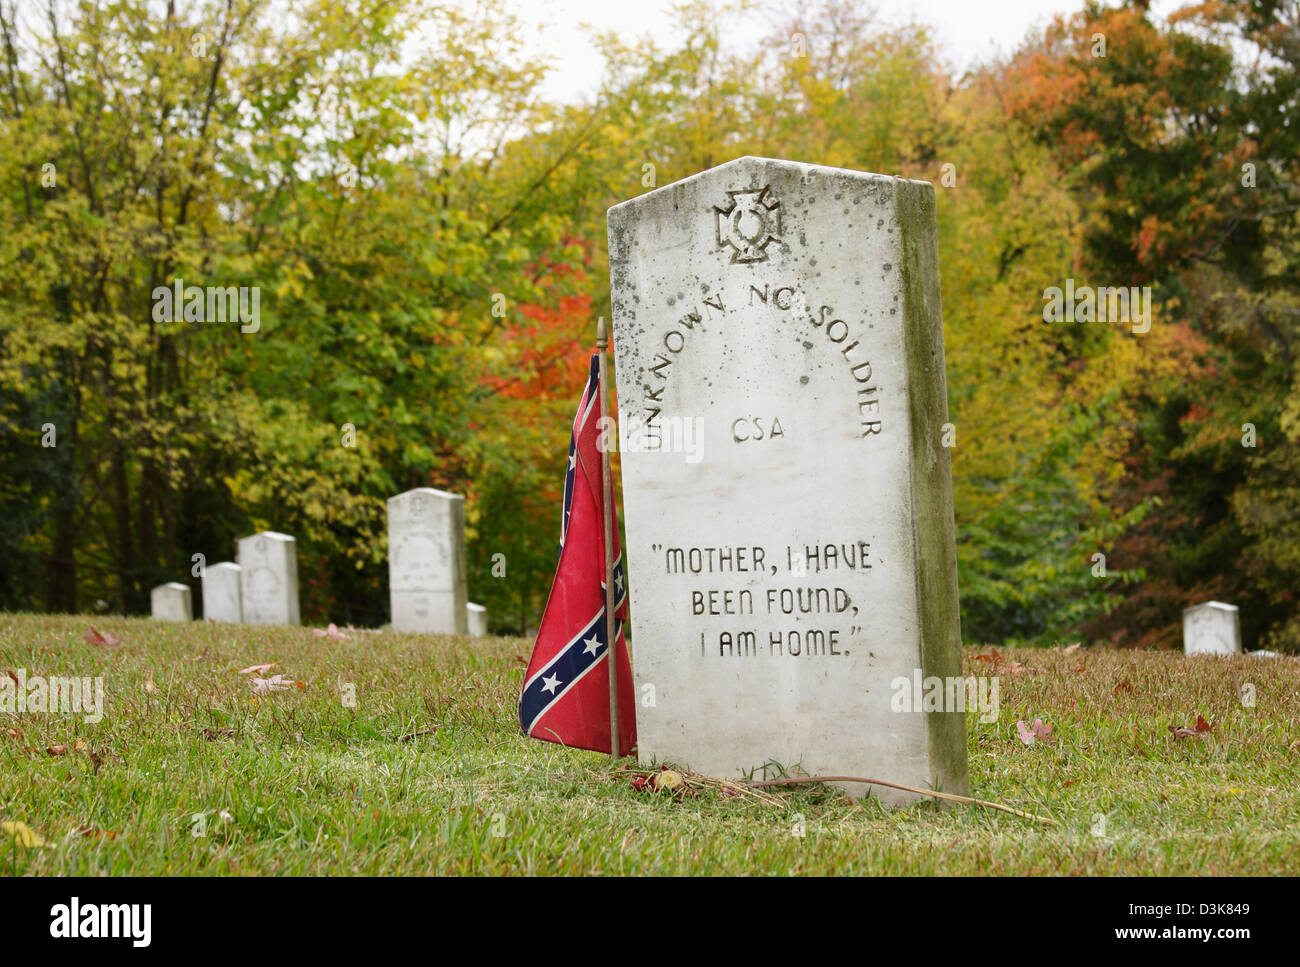 Unknown Confederate soldier, Oakwood Cemetery, Raleigh, NC, USA.  Inscription reads 'Mother, I have been found, I am home.' Stock Photo